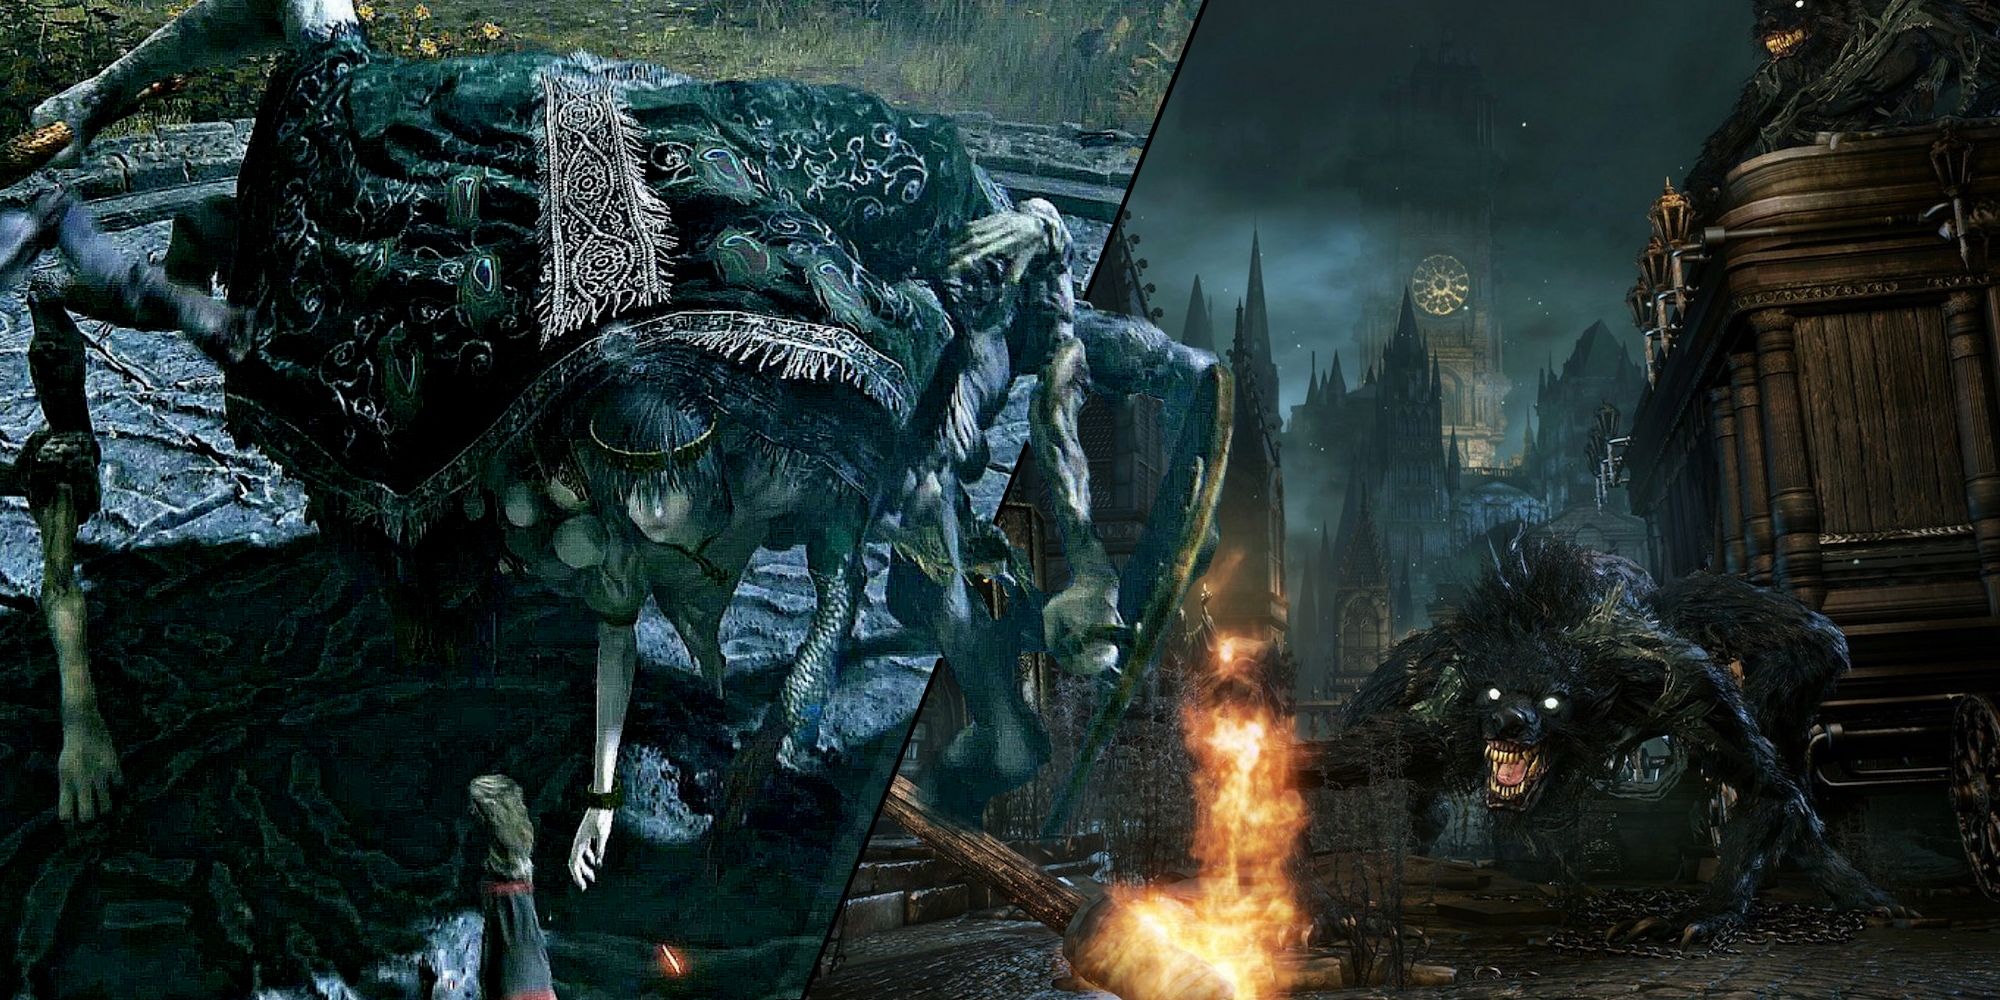 This was the hardest boss of the soulsborne series for me, what was yours?  (Vials ran out in the Last third of the fight and my heart was beating out  of my